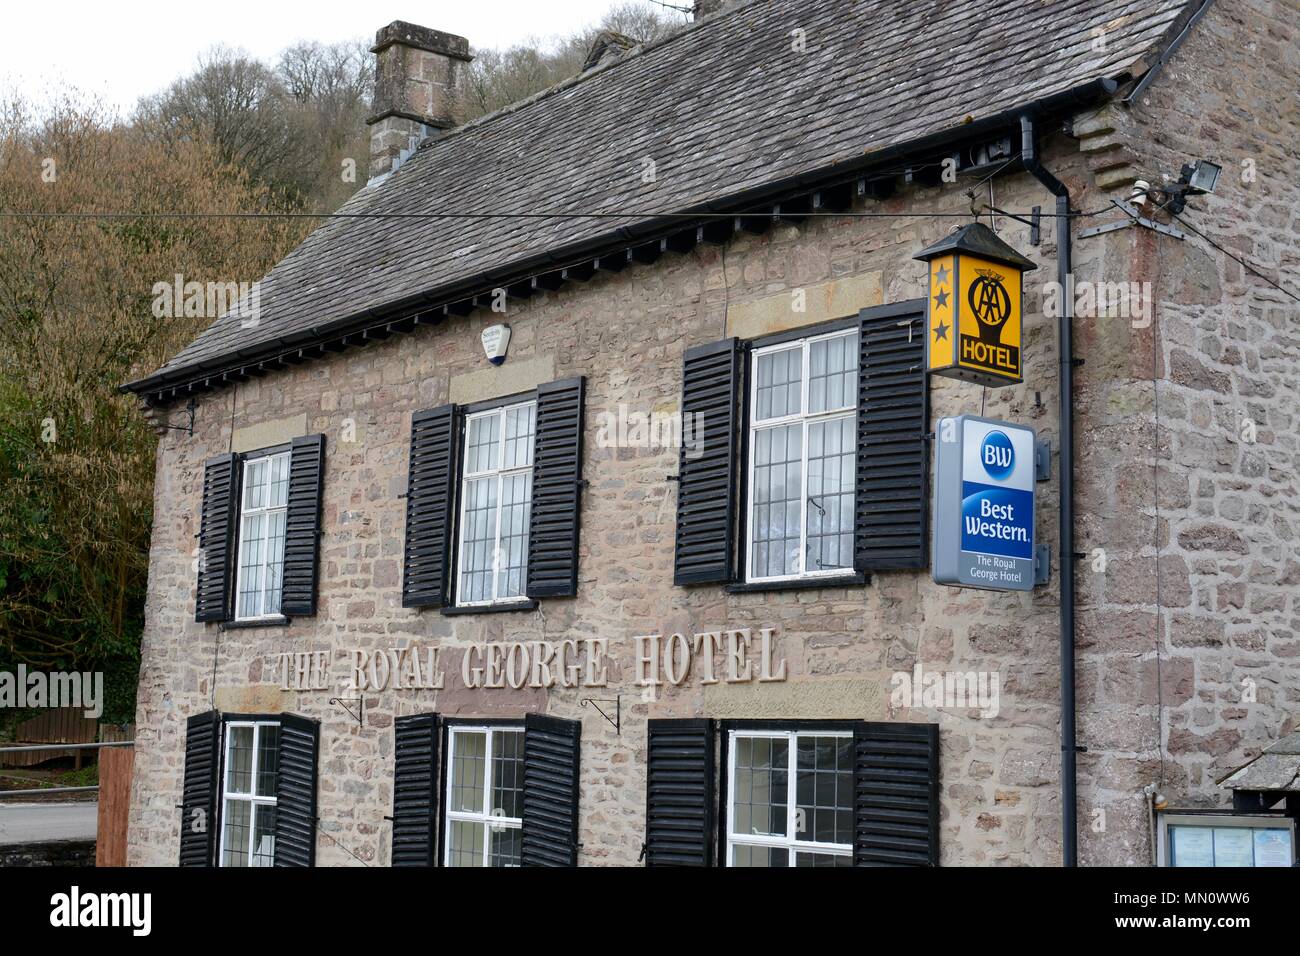 The royal George hotel in the village of Tintern, Wye Valley, Monmouthshire, UK Stock Photo